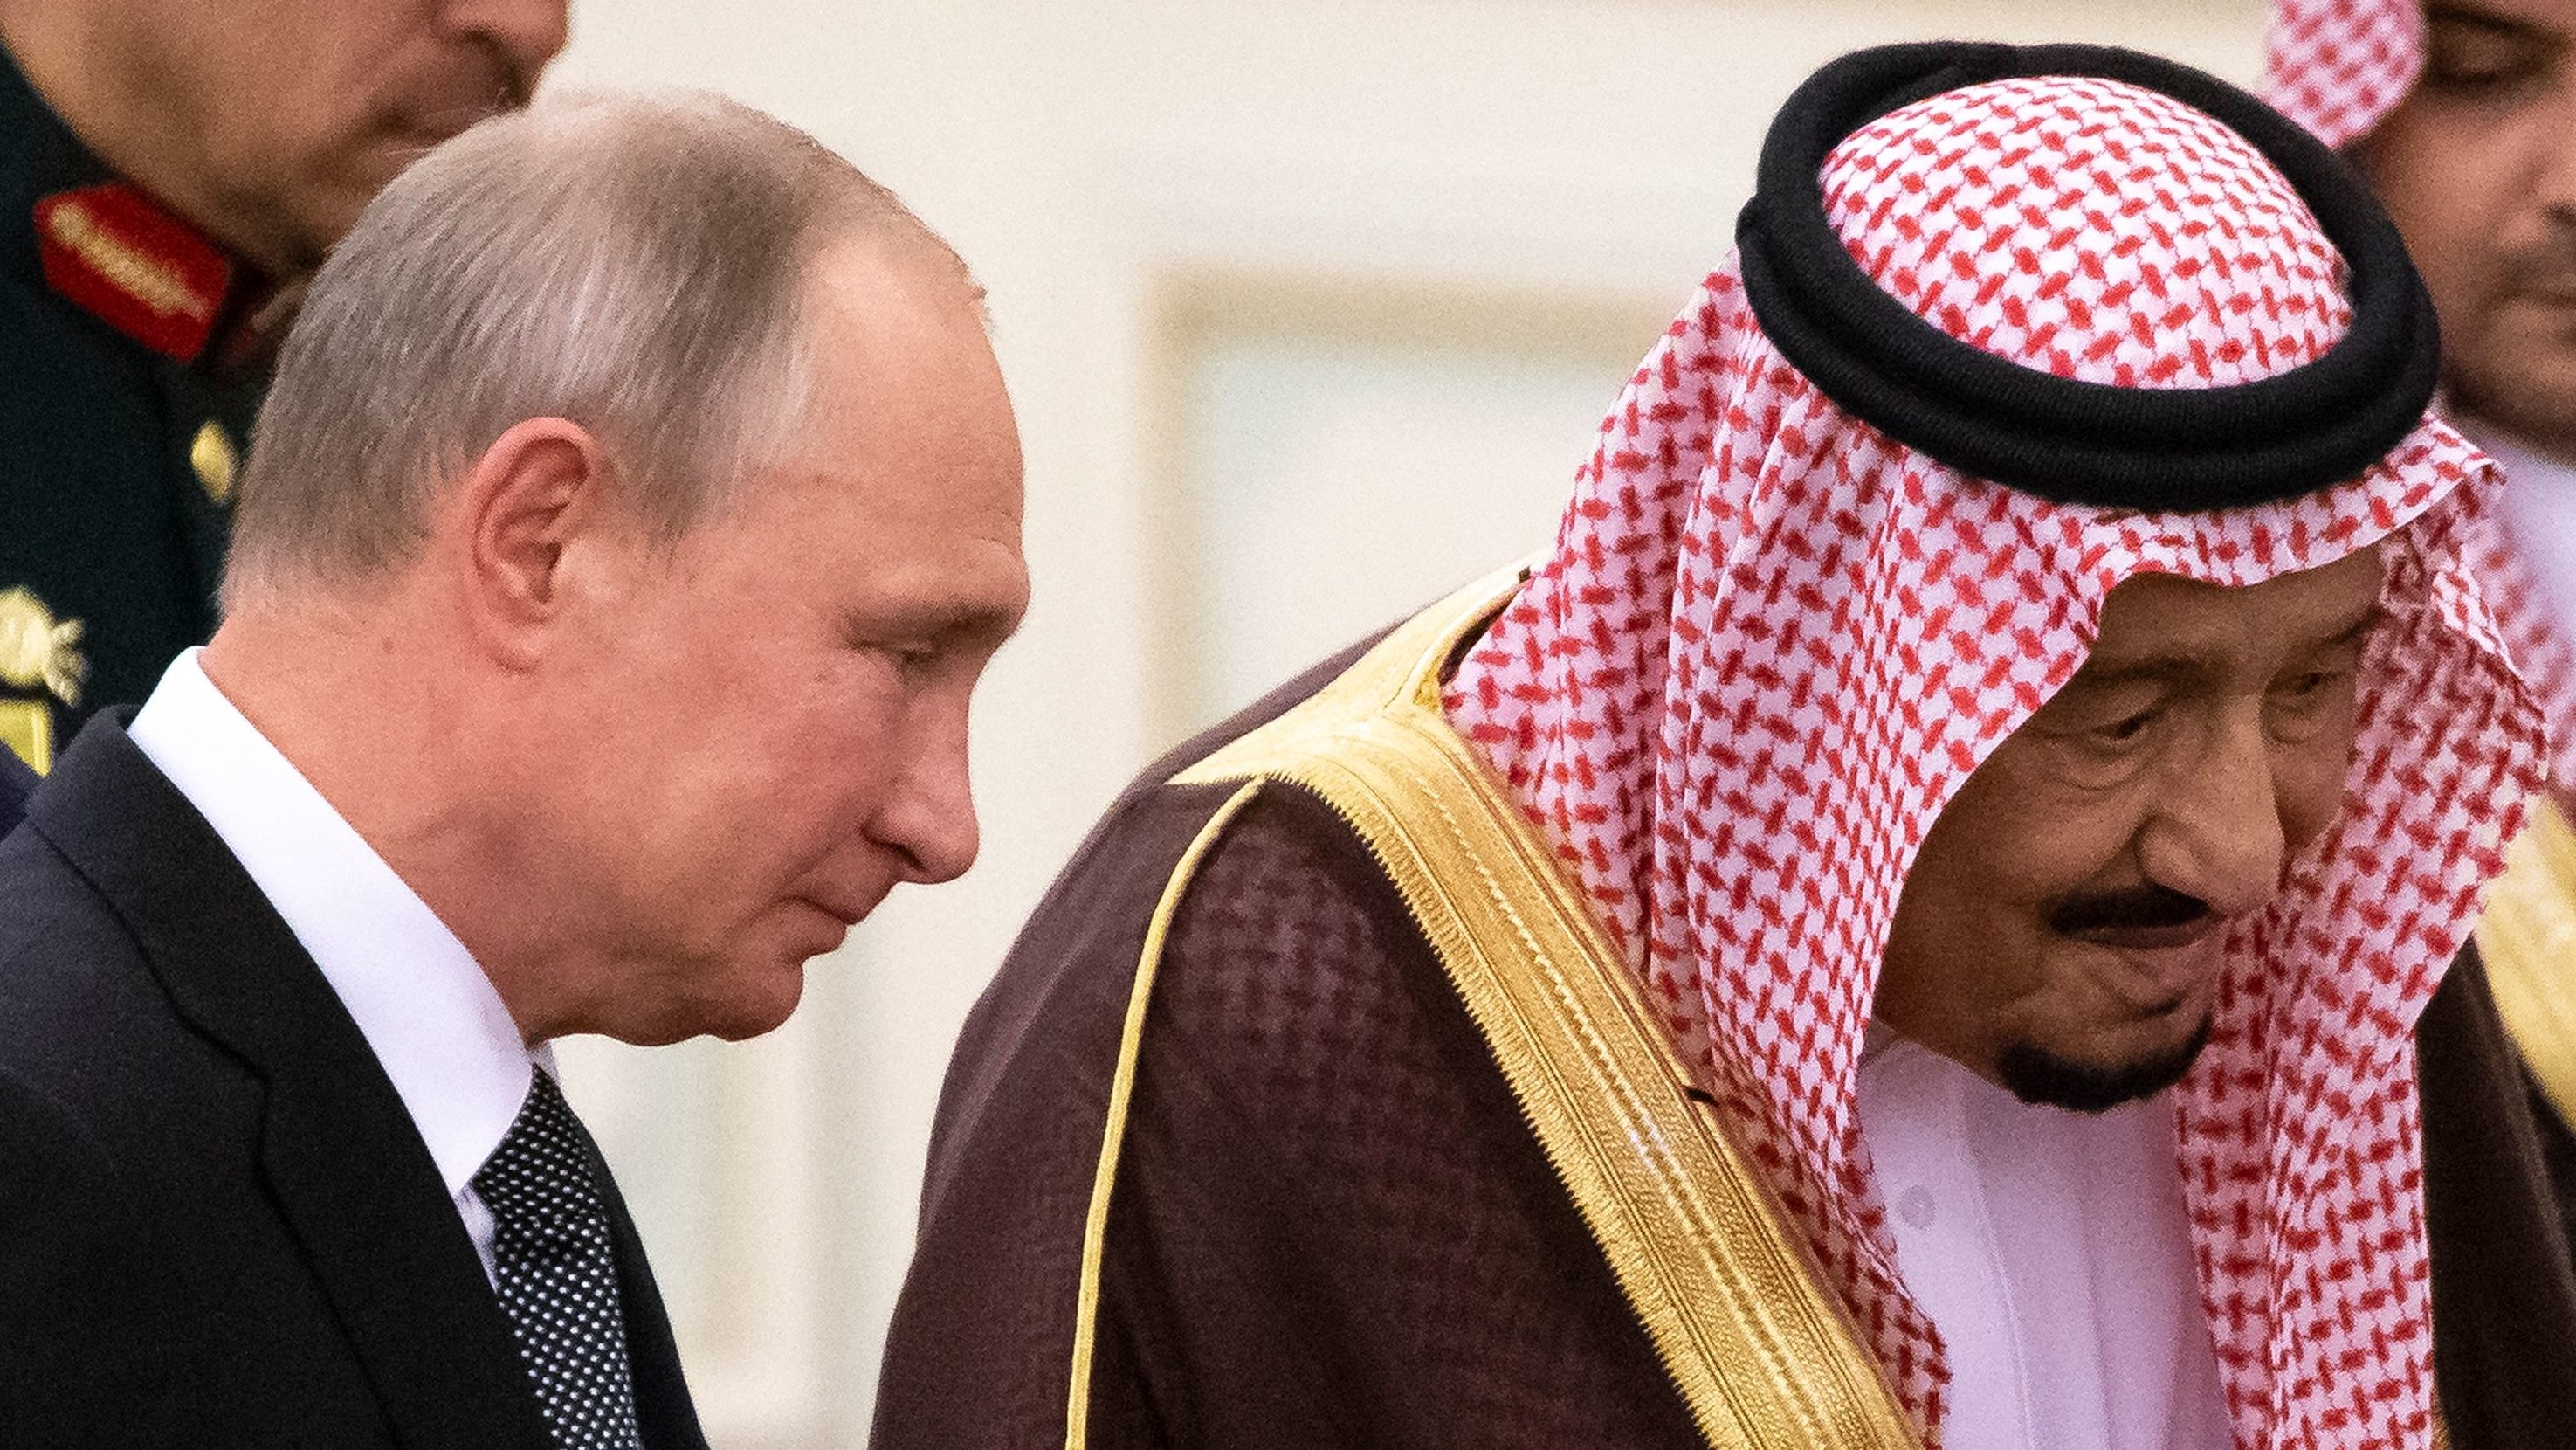 Putin’s Important Visit to the Gulf